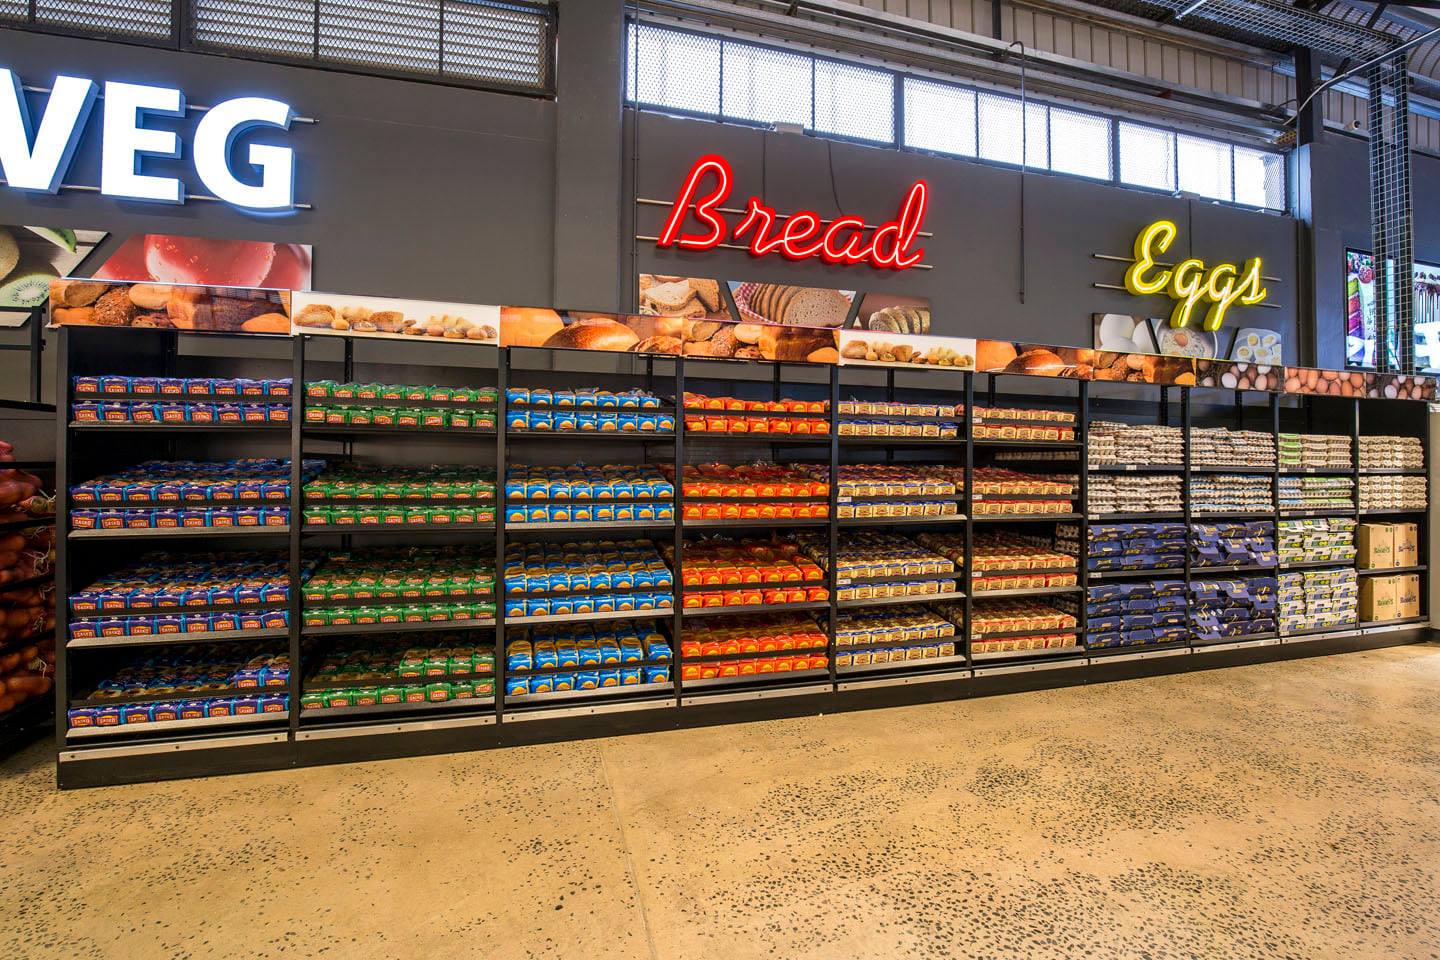 Shelving for bread in a supermarket